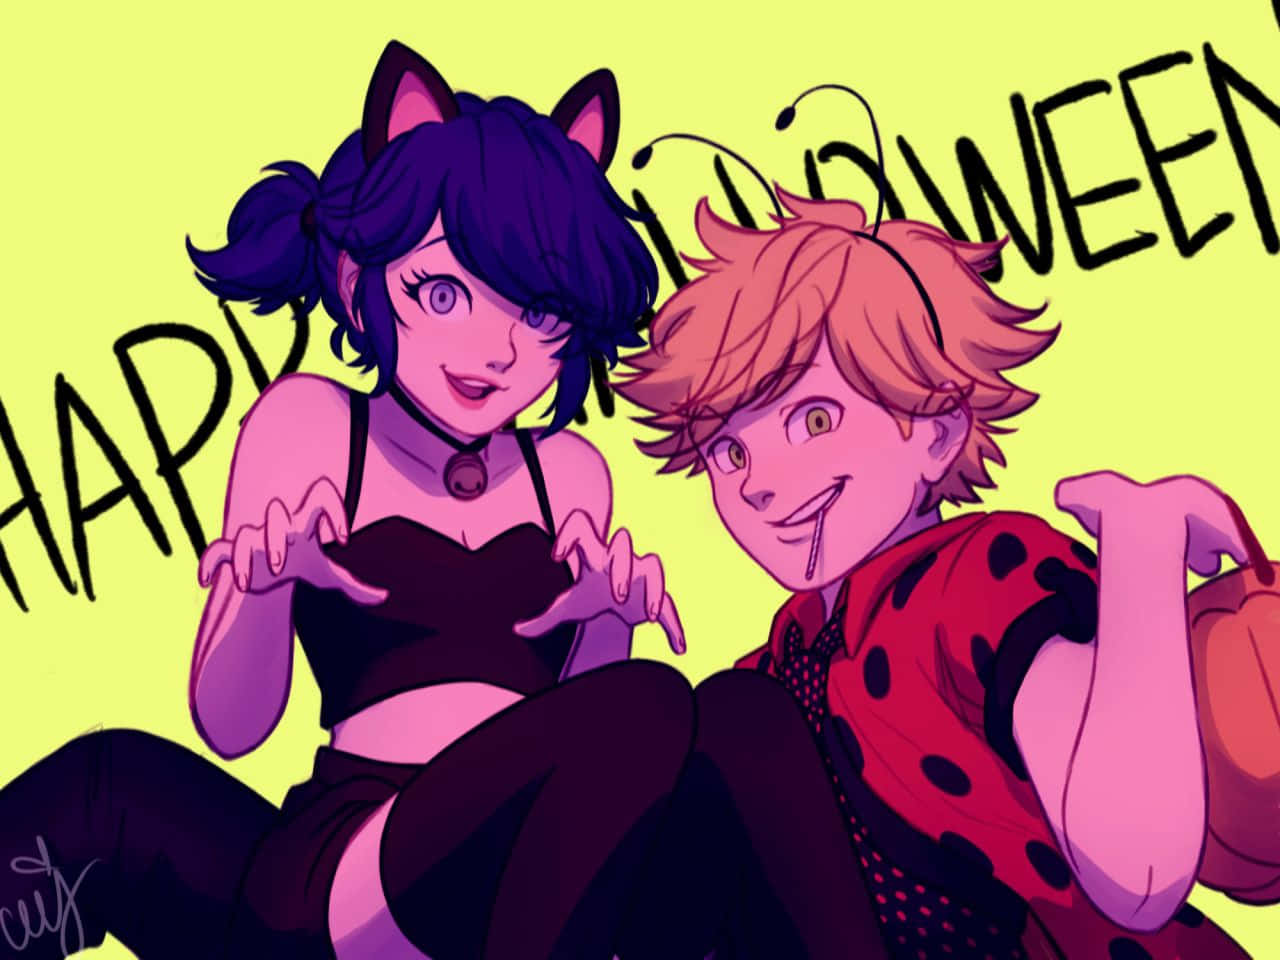 Ladybug and Cat Noir - the Miraculous Heroes!